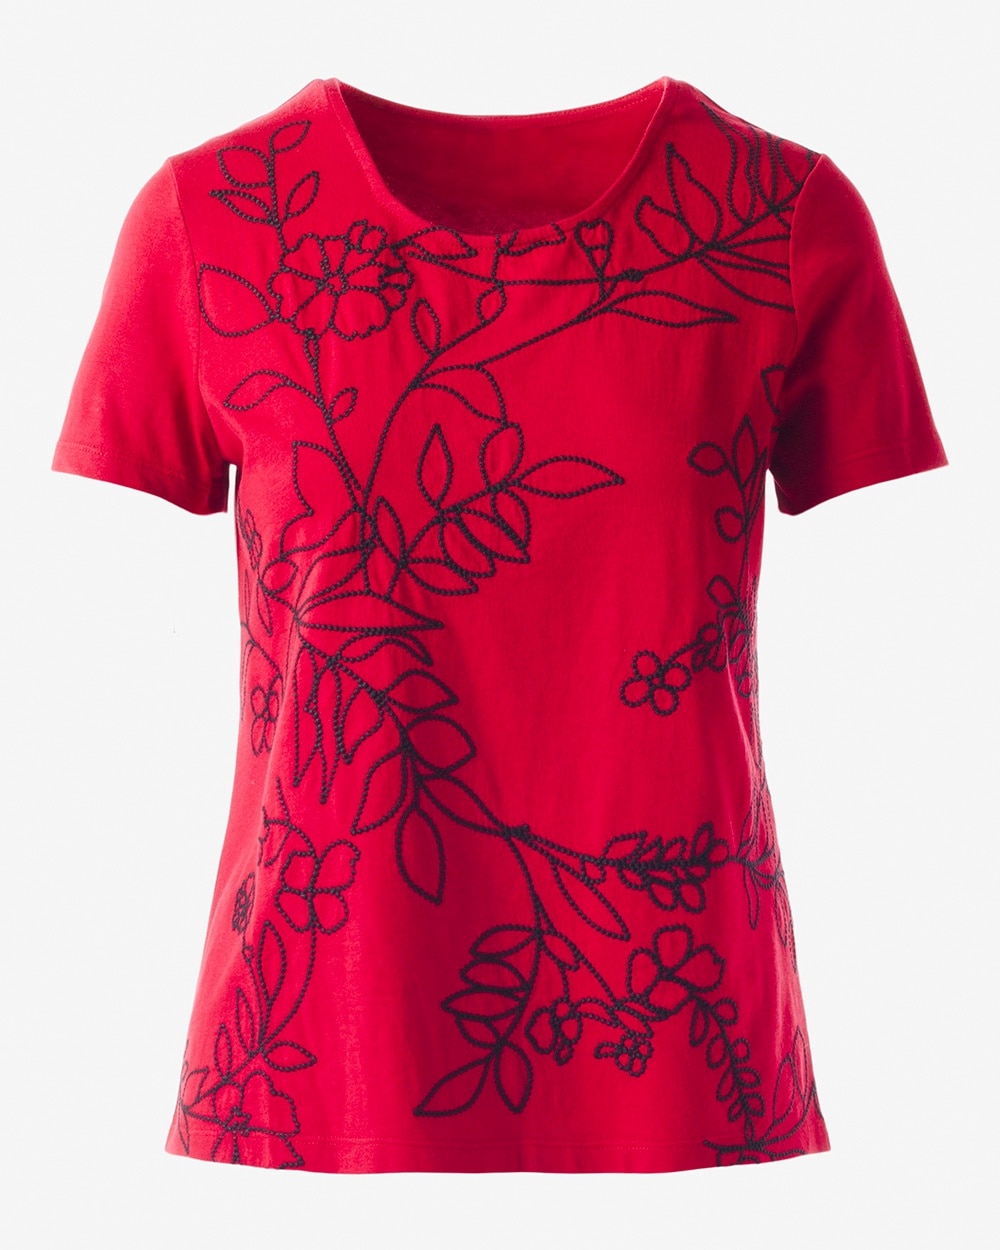 Floral Embroidery Scoop-Neck Tee